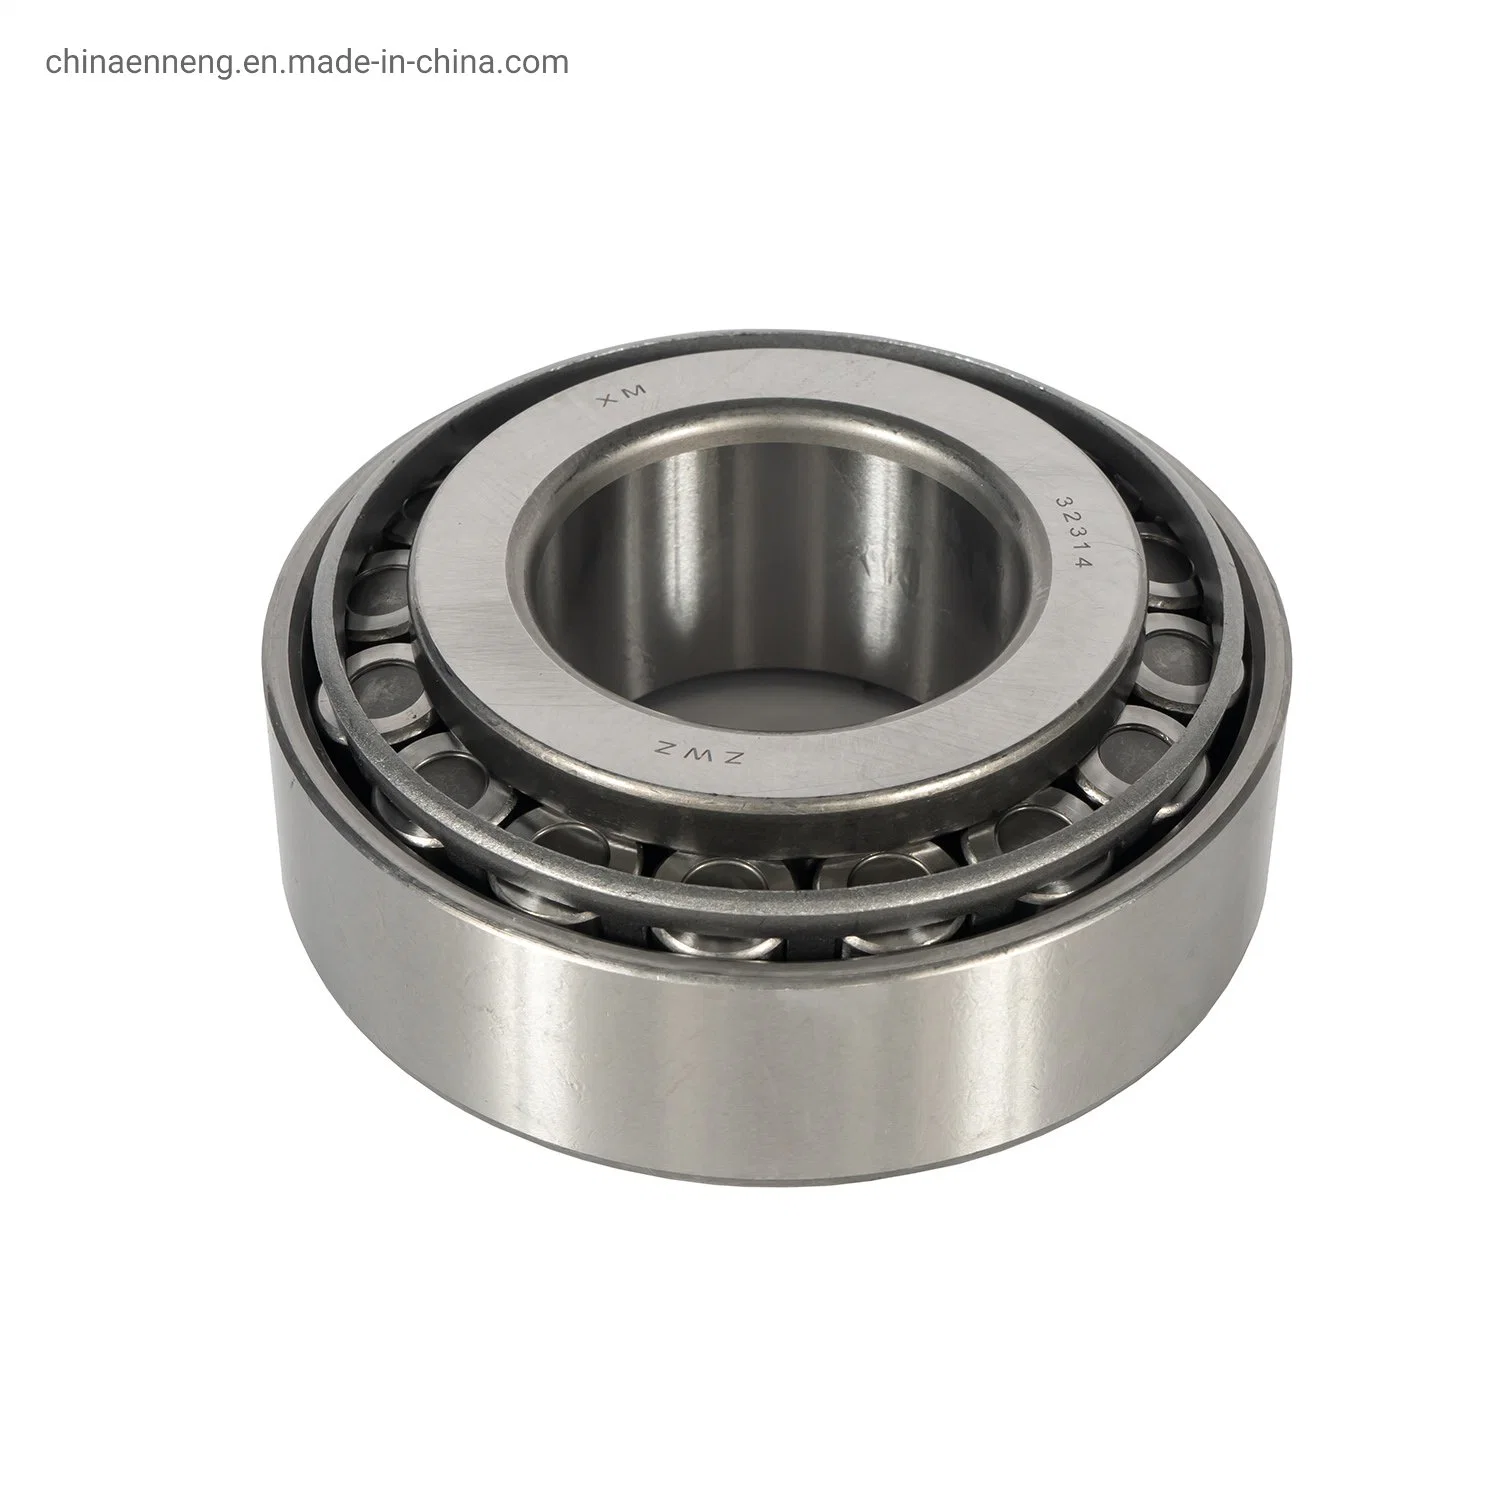 Tapered Roller Bearing for Sinotruk HOWO FAW Shacman Foton Dongfeng Commins Weichai, Yuchai XCMG Shantui Xgma Sany Engine Truck Spare Parts OEM Factory Original